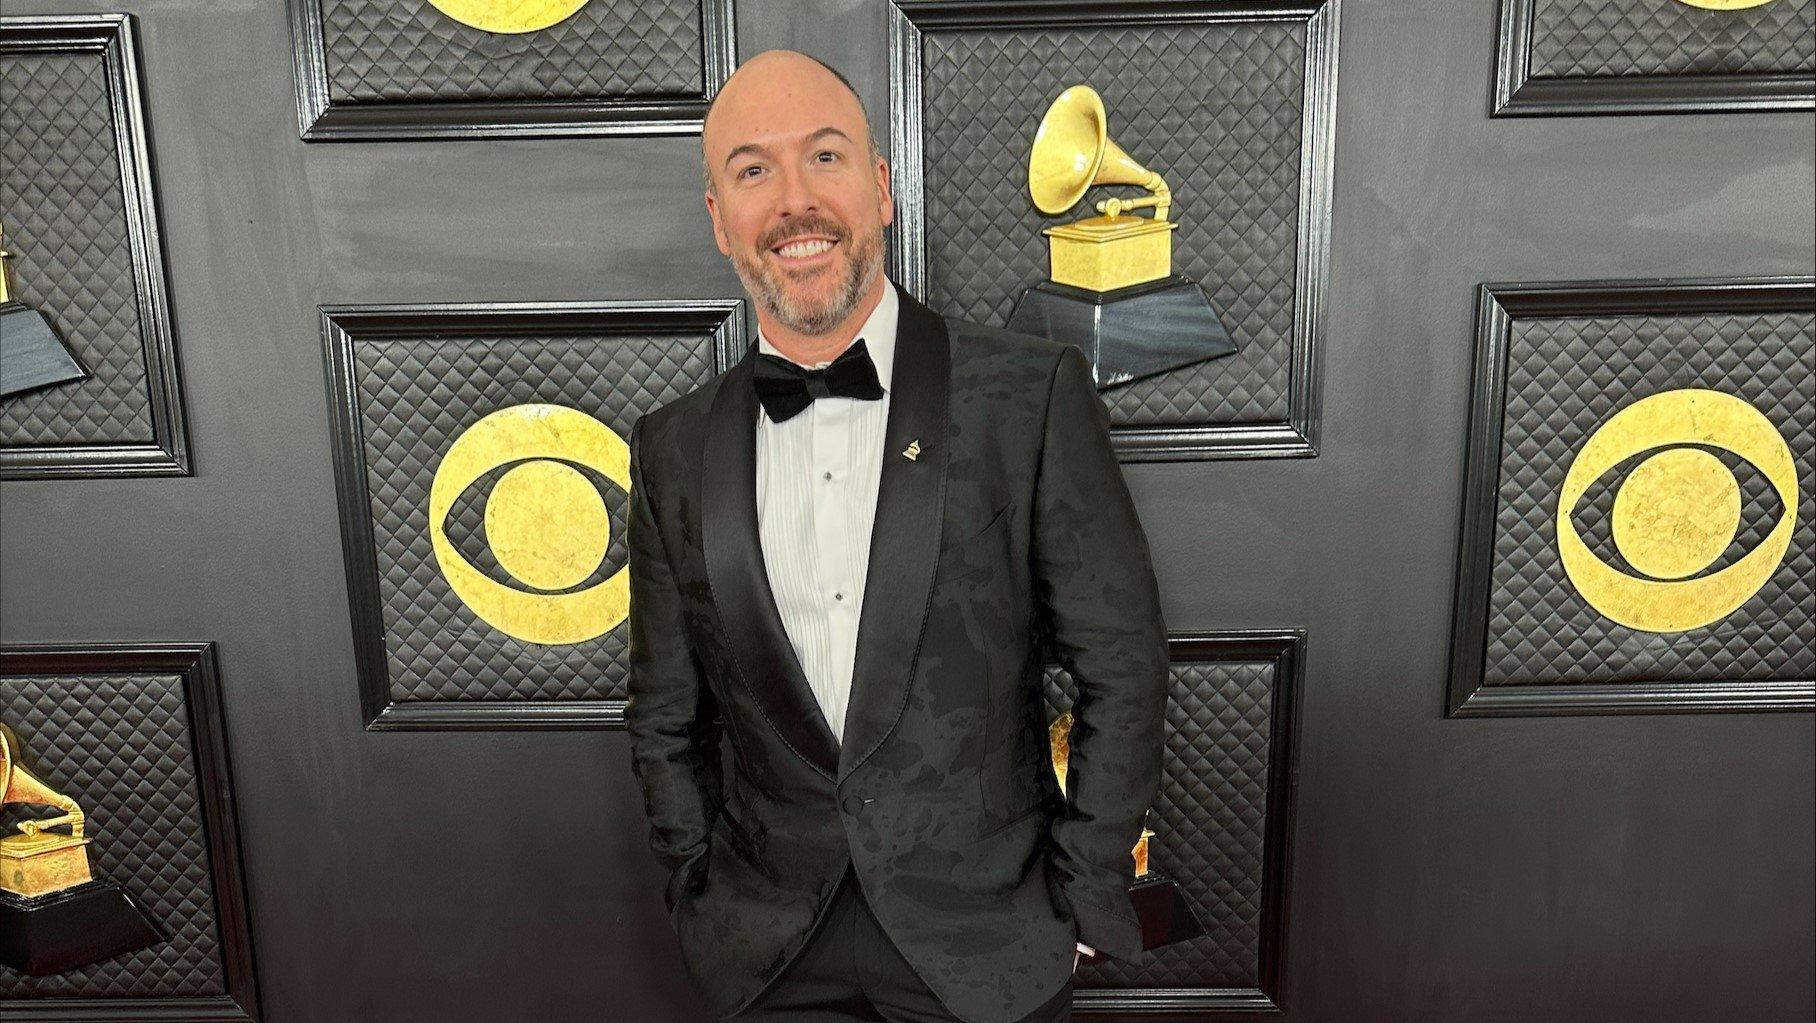 Adam Roth, Executive Vice President of Global Partnerships & Business Development for the Recording Academy, attending the GRAMMY Awards